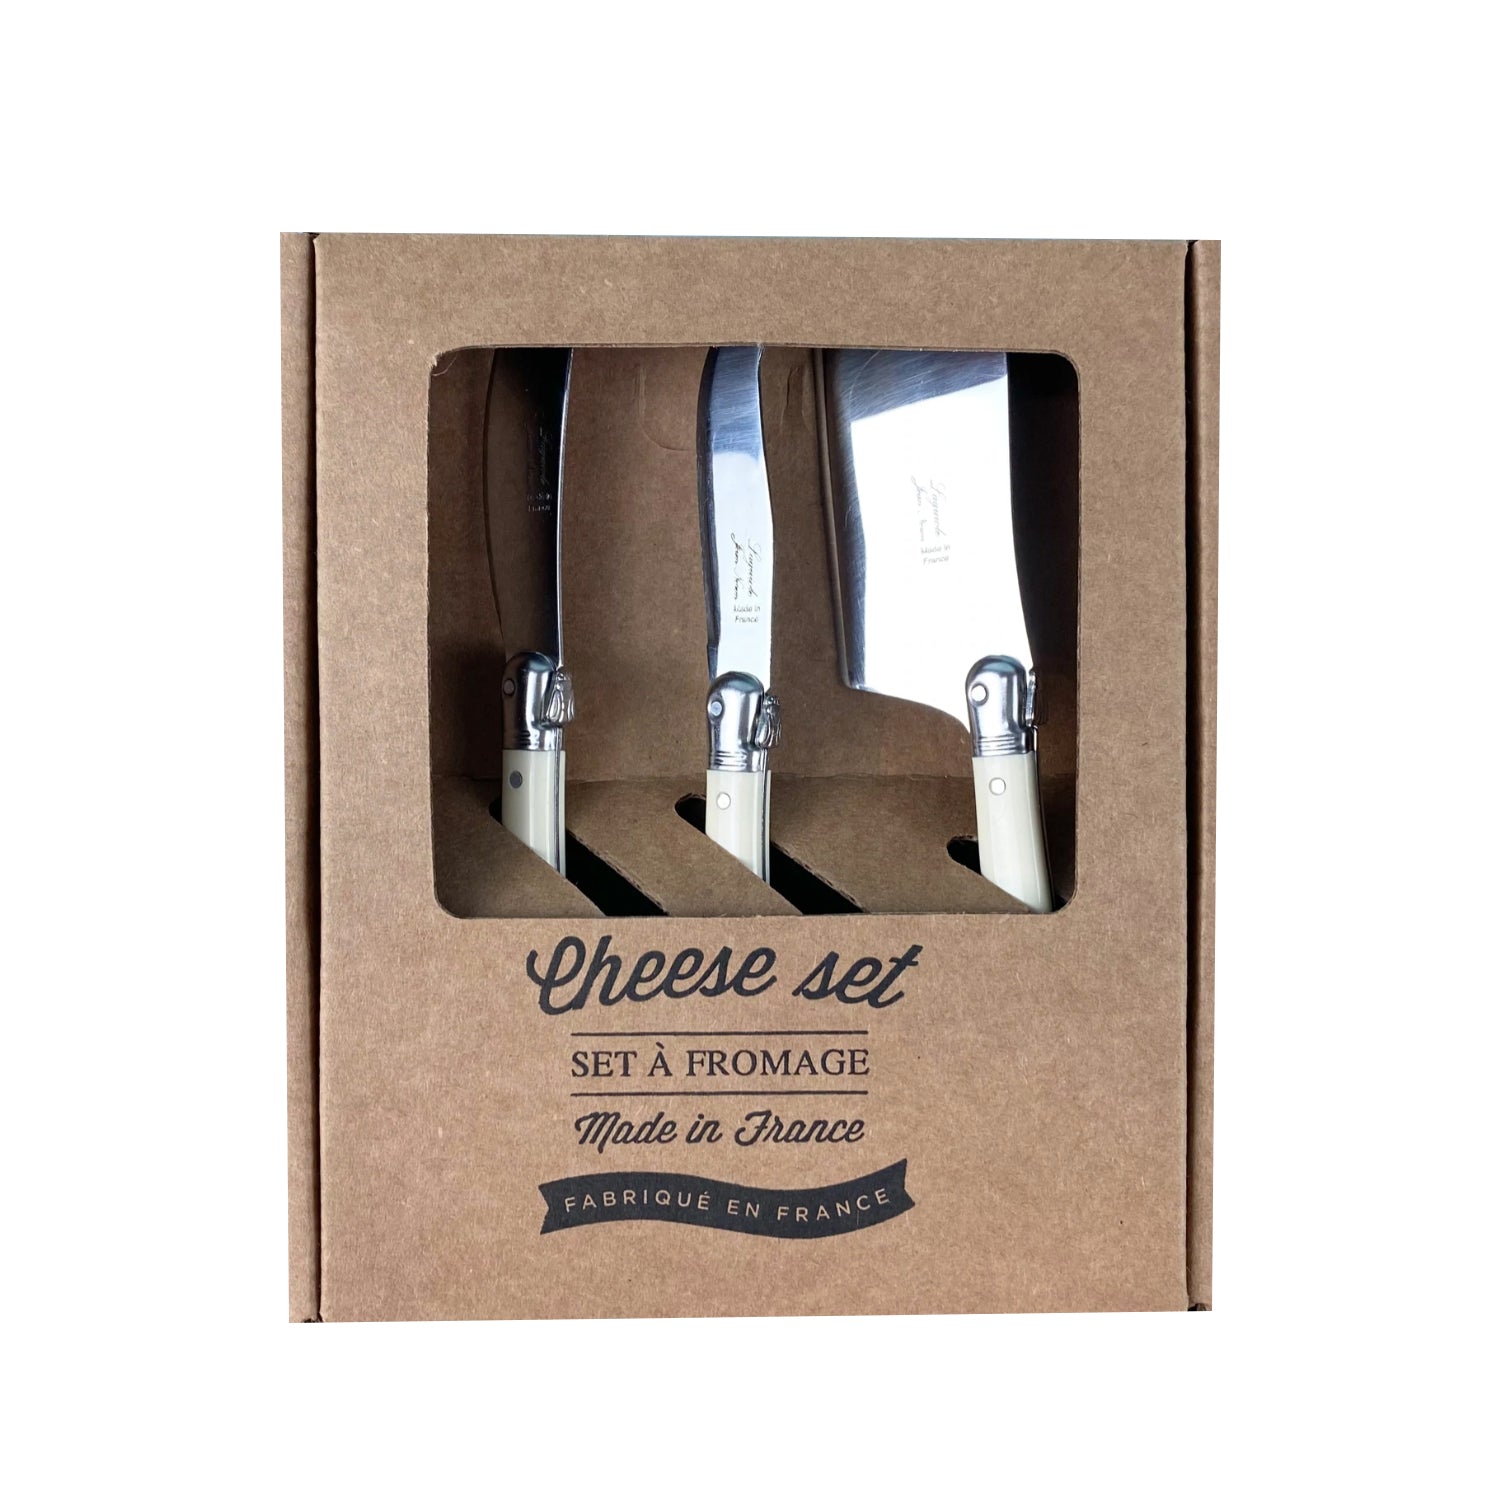 Laguiole Mini Cheese Set - Ivory / Brown Box (Set of 3 Utensils)